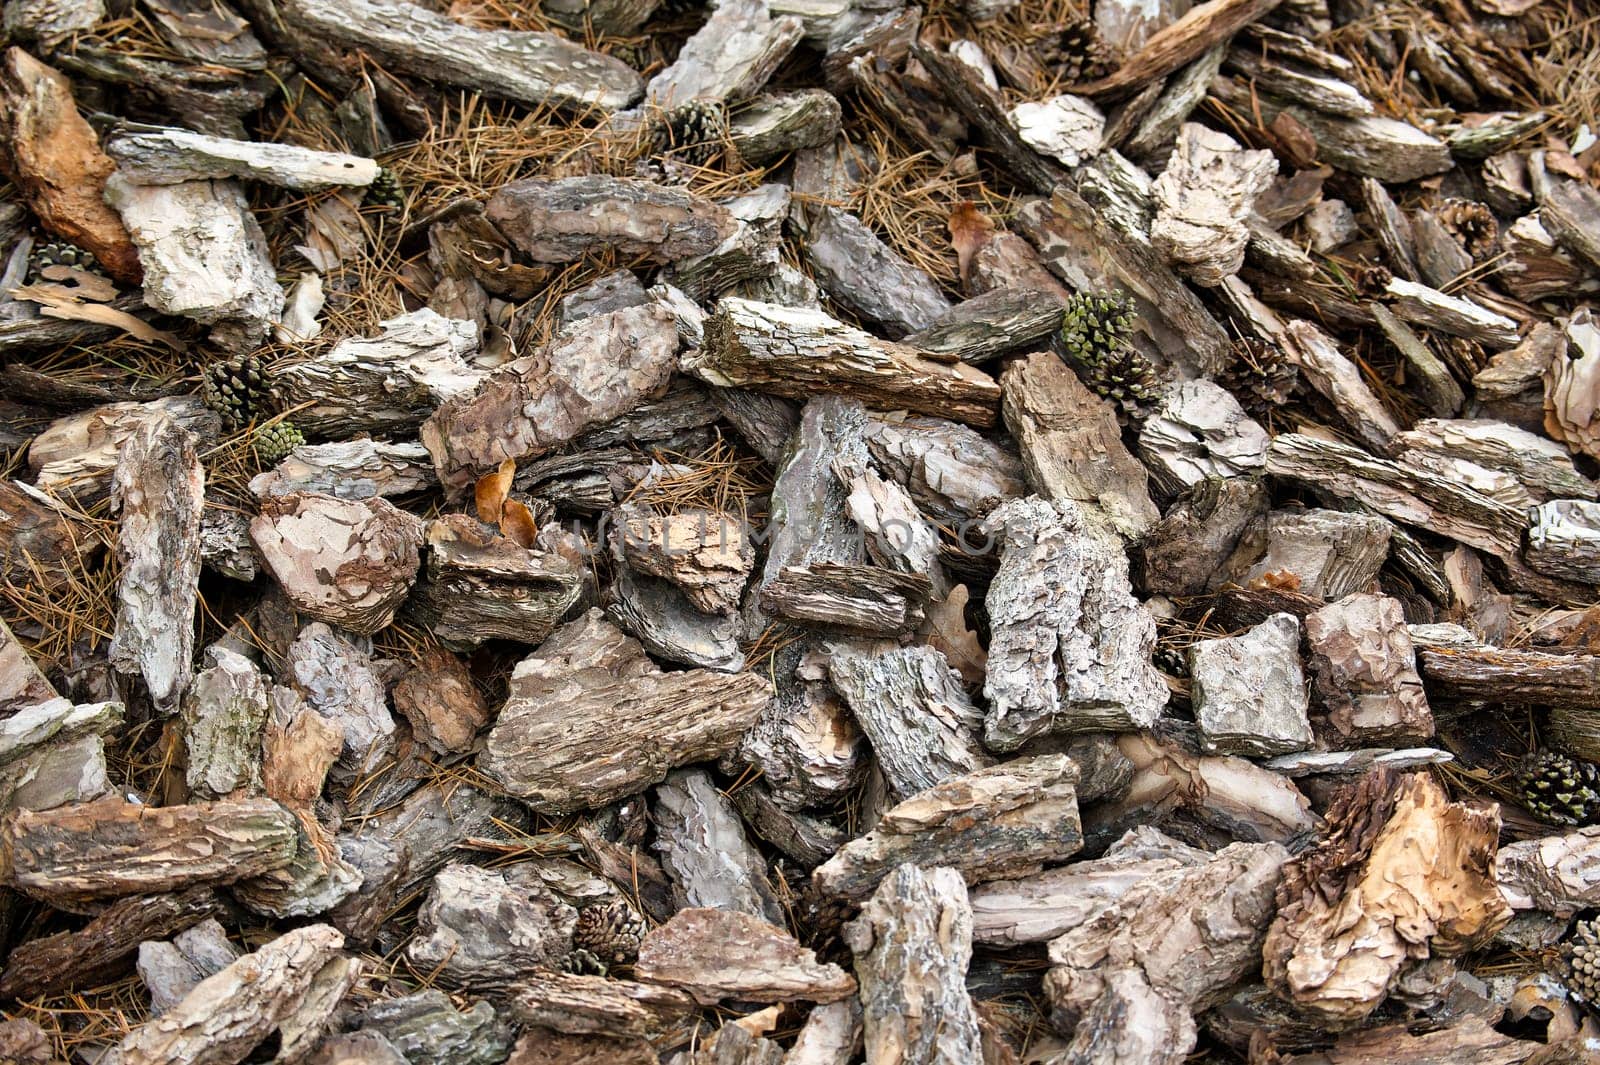 Wood chips, mixture of dark gray, light gray, and brown tones, creating a textured and natural appearance